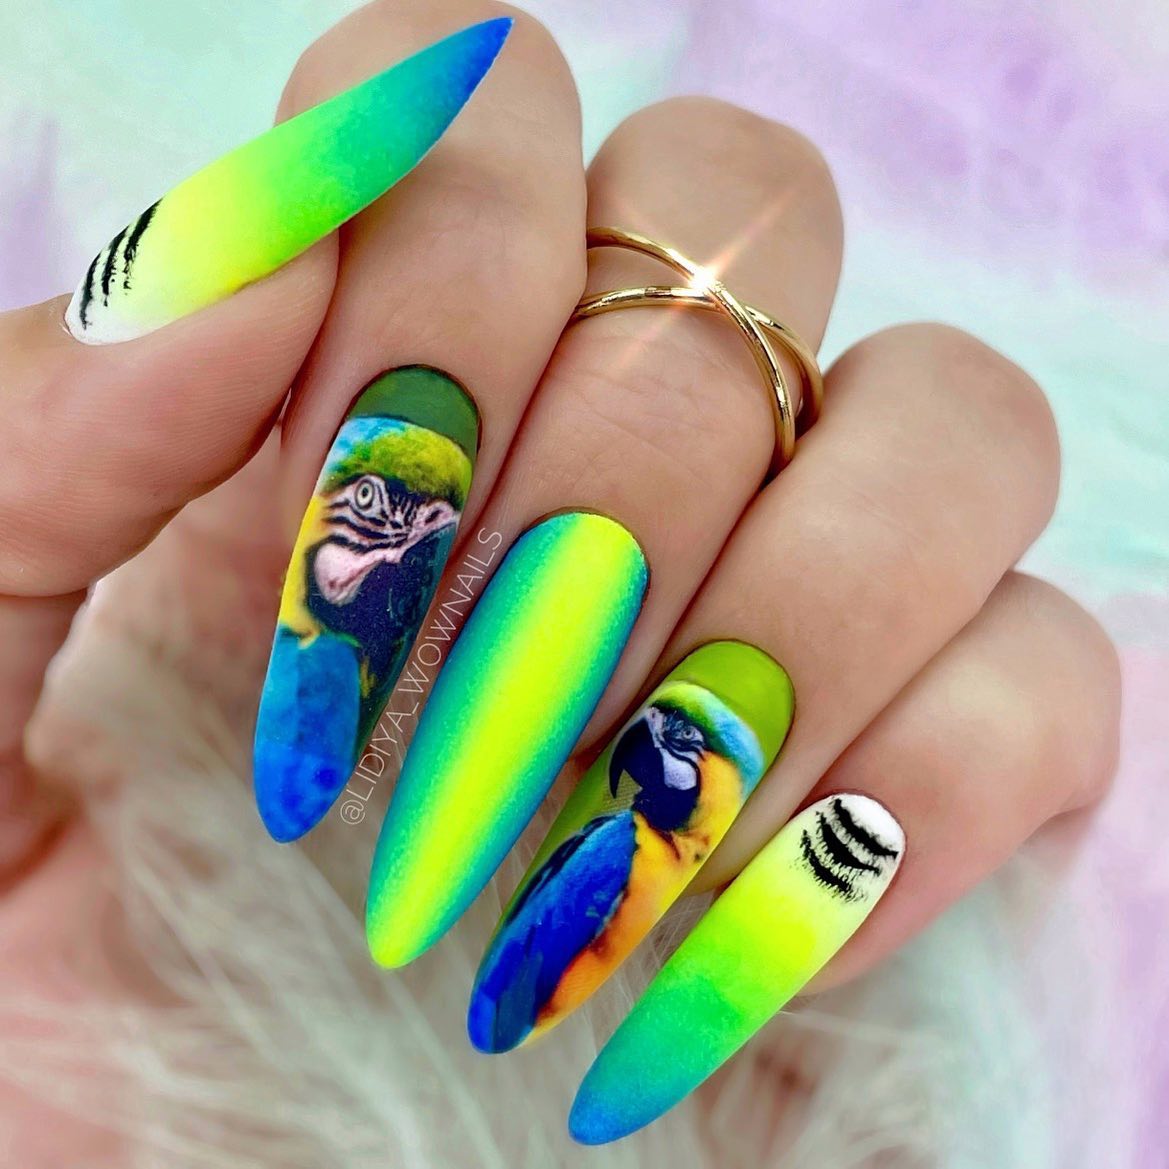 Neon Green Nails with Parrots